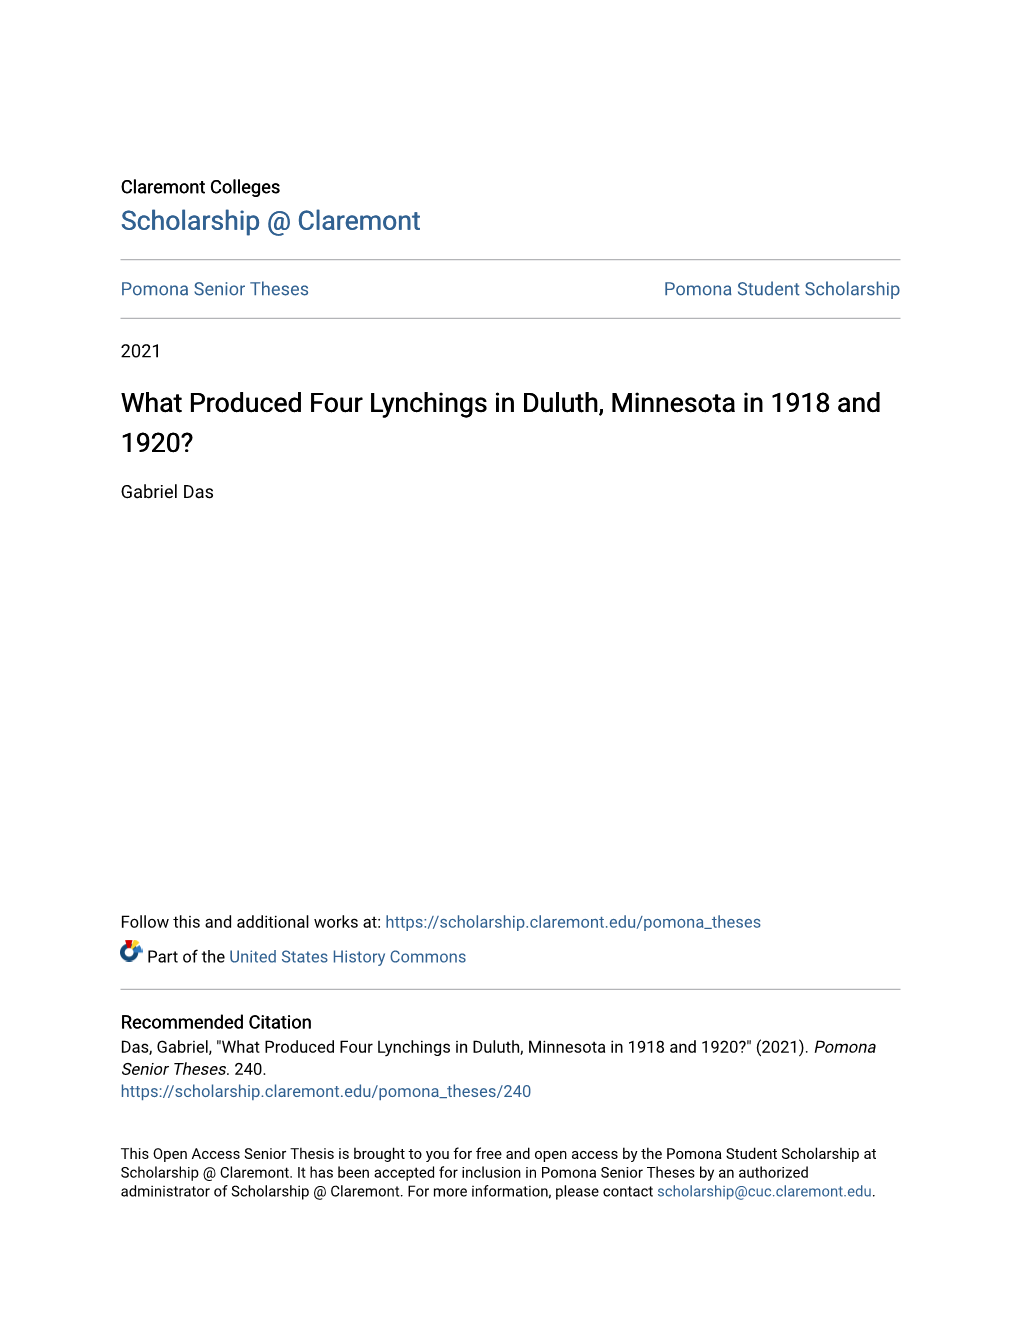 What Produced Four Lynchings in Duluth, Minnesota in 1918 and 1920?